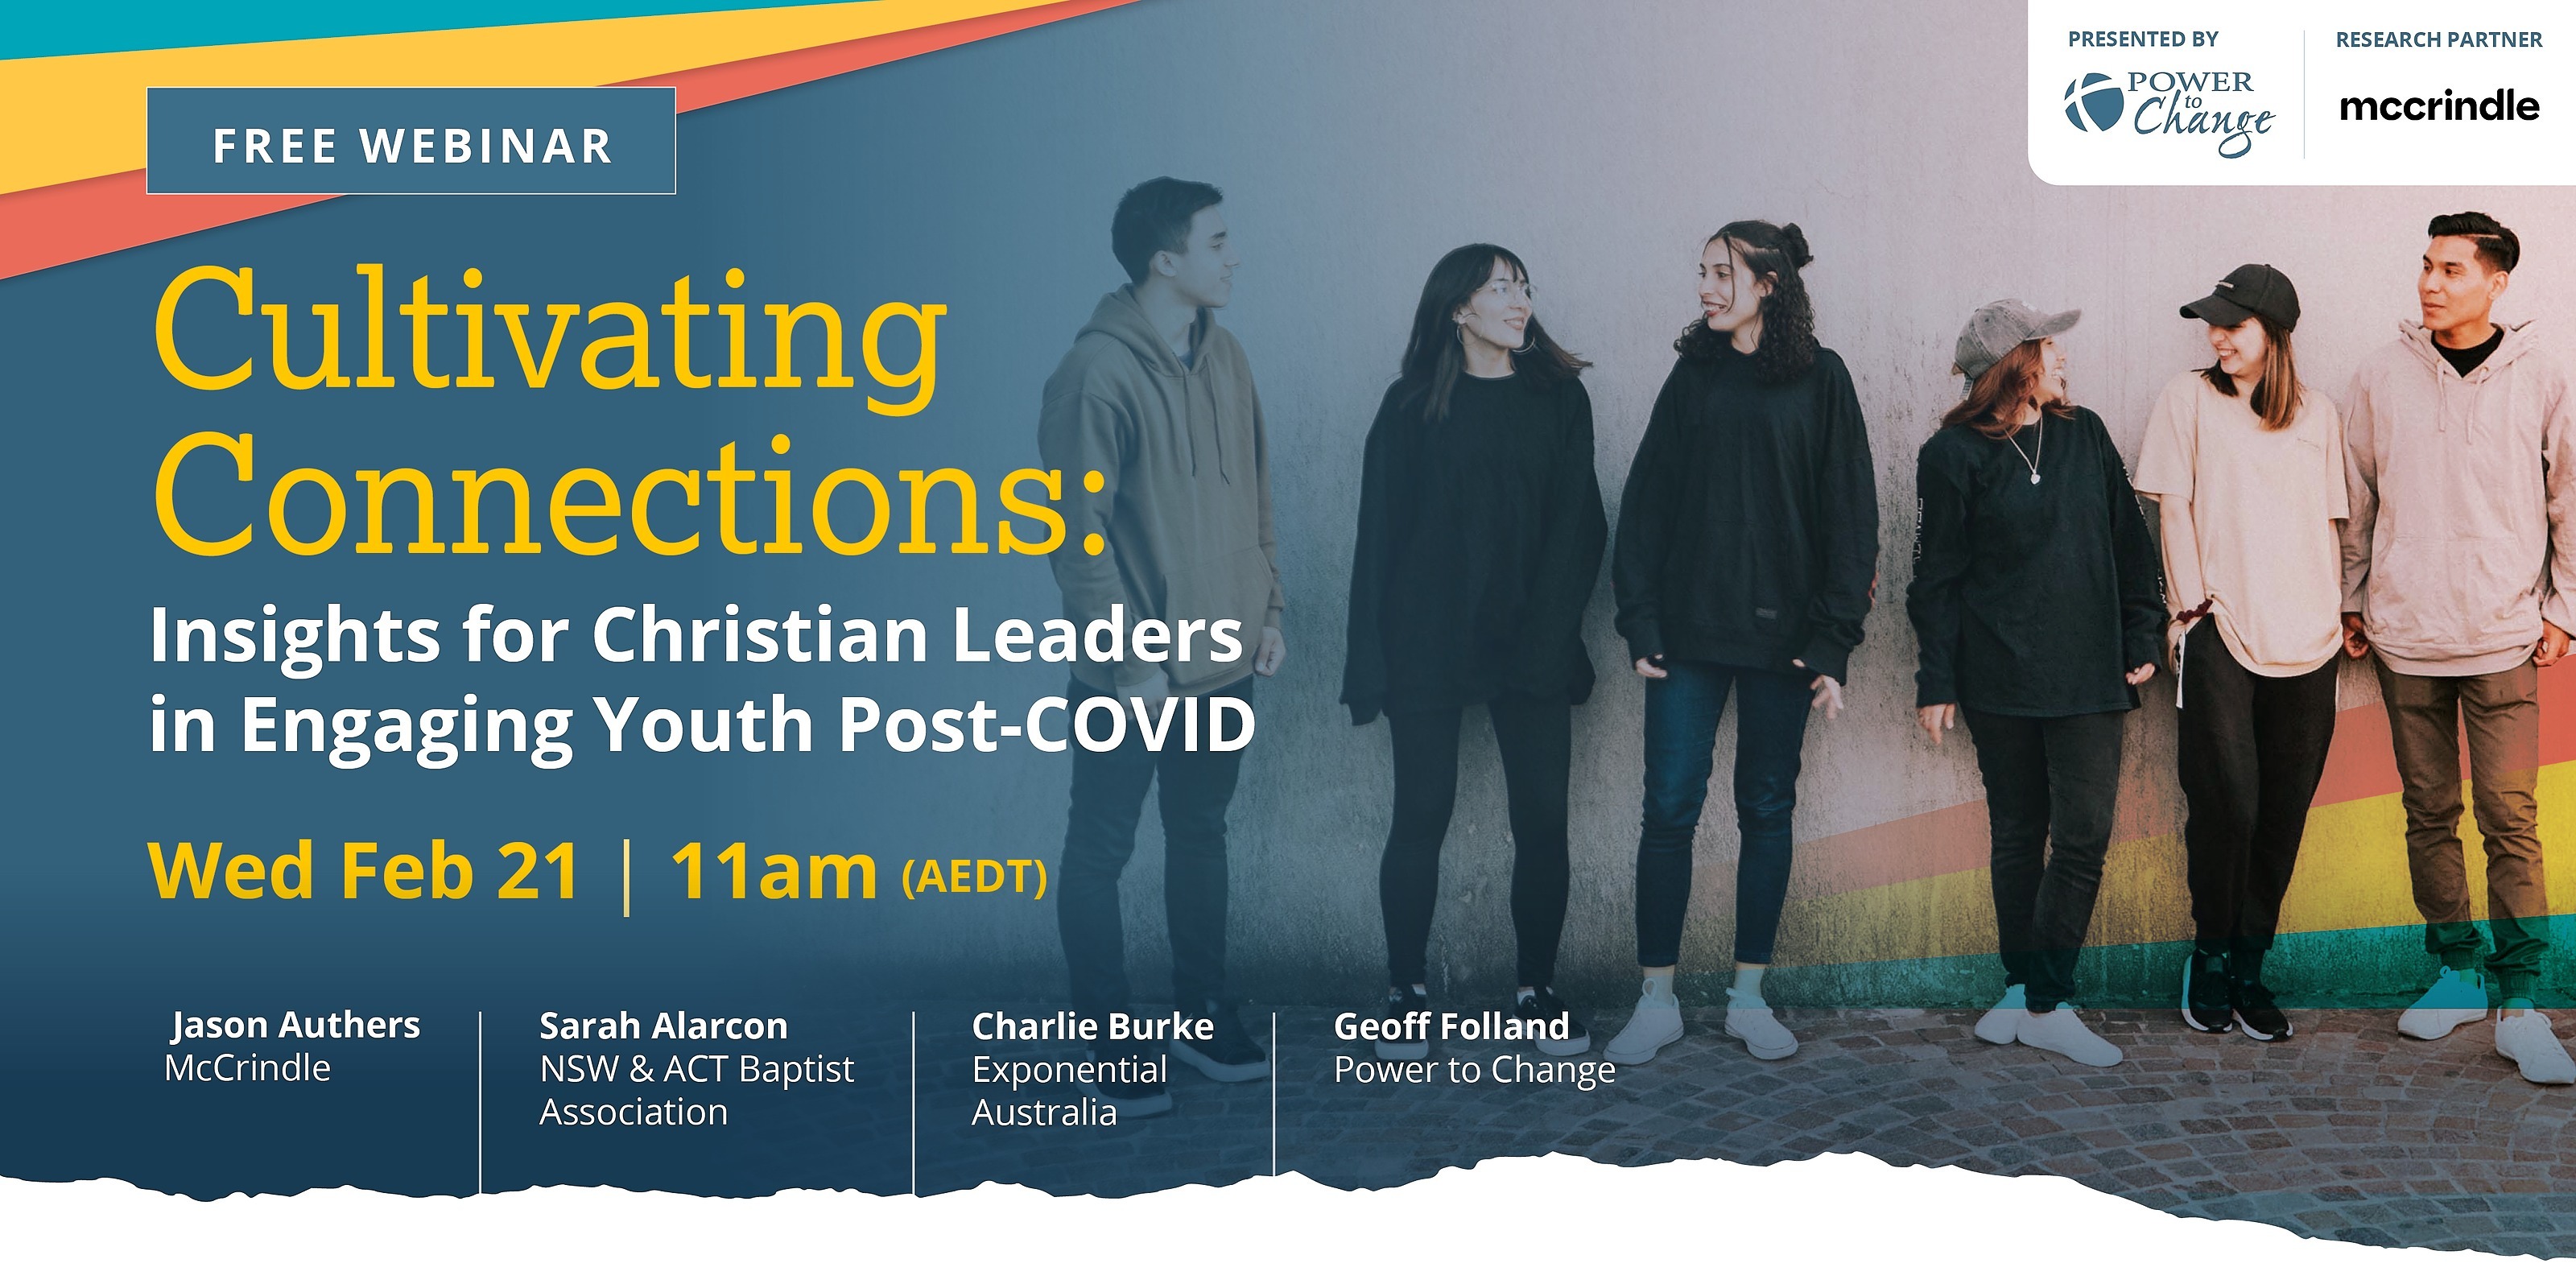 Cultivating Connections Insights for Christian Leaders in Engaging